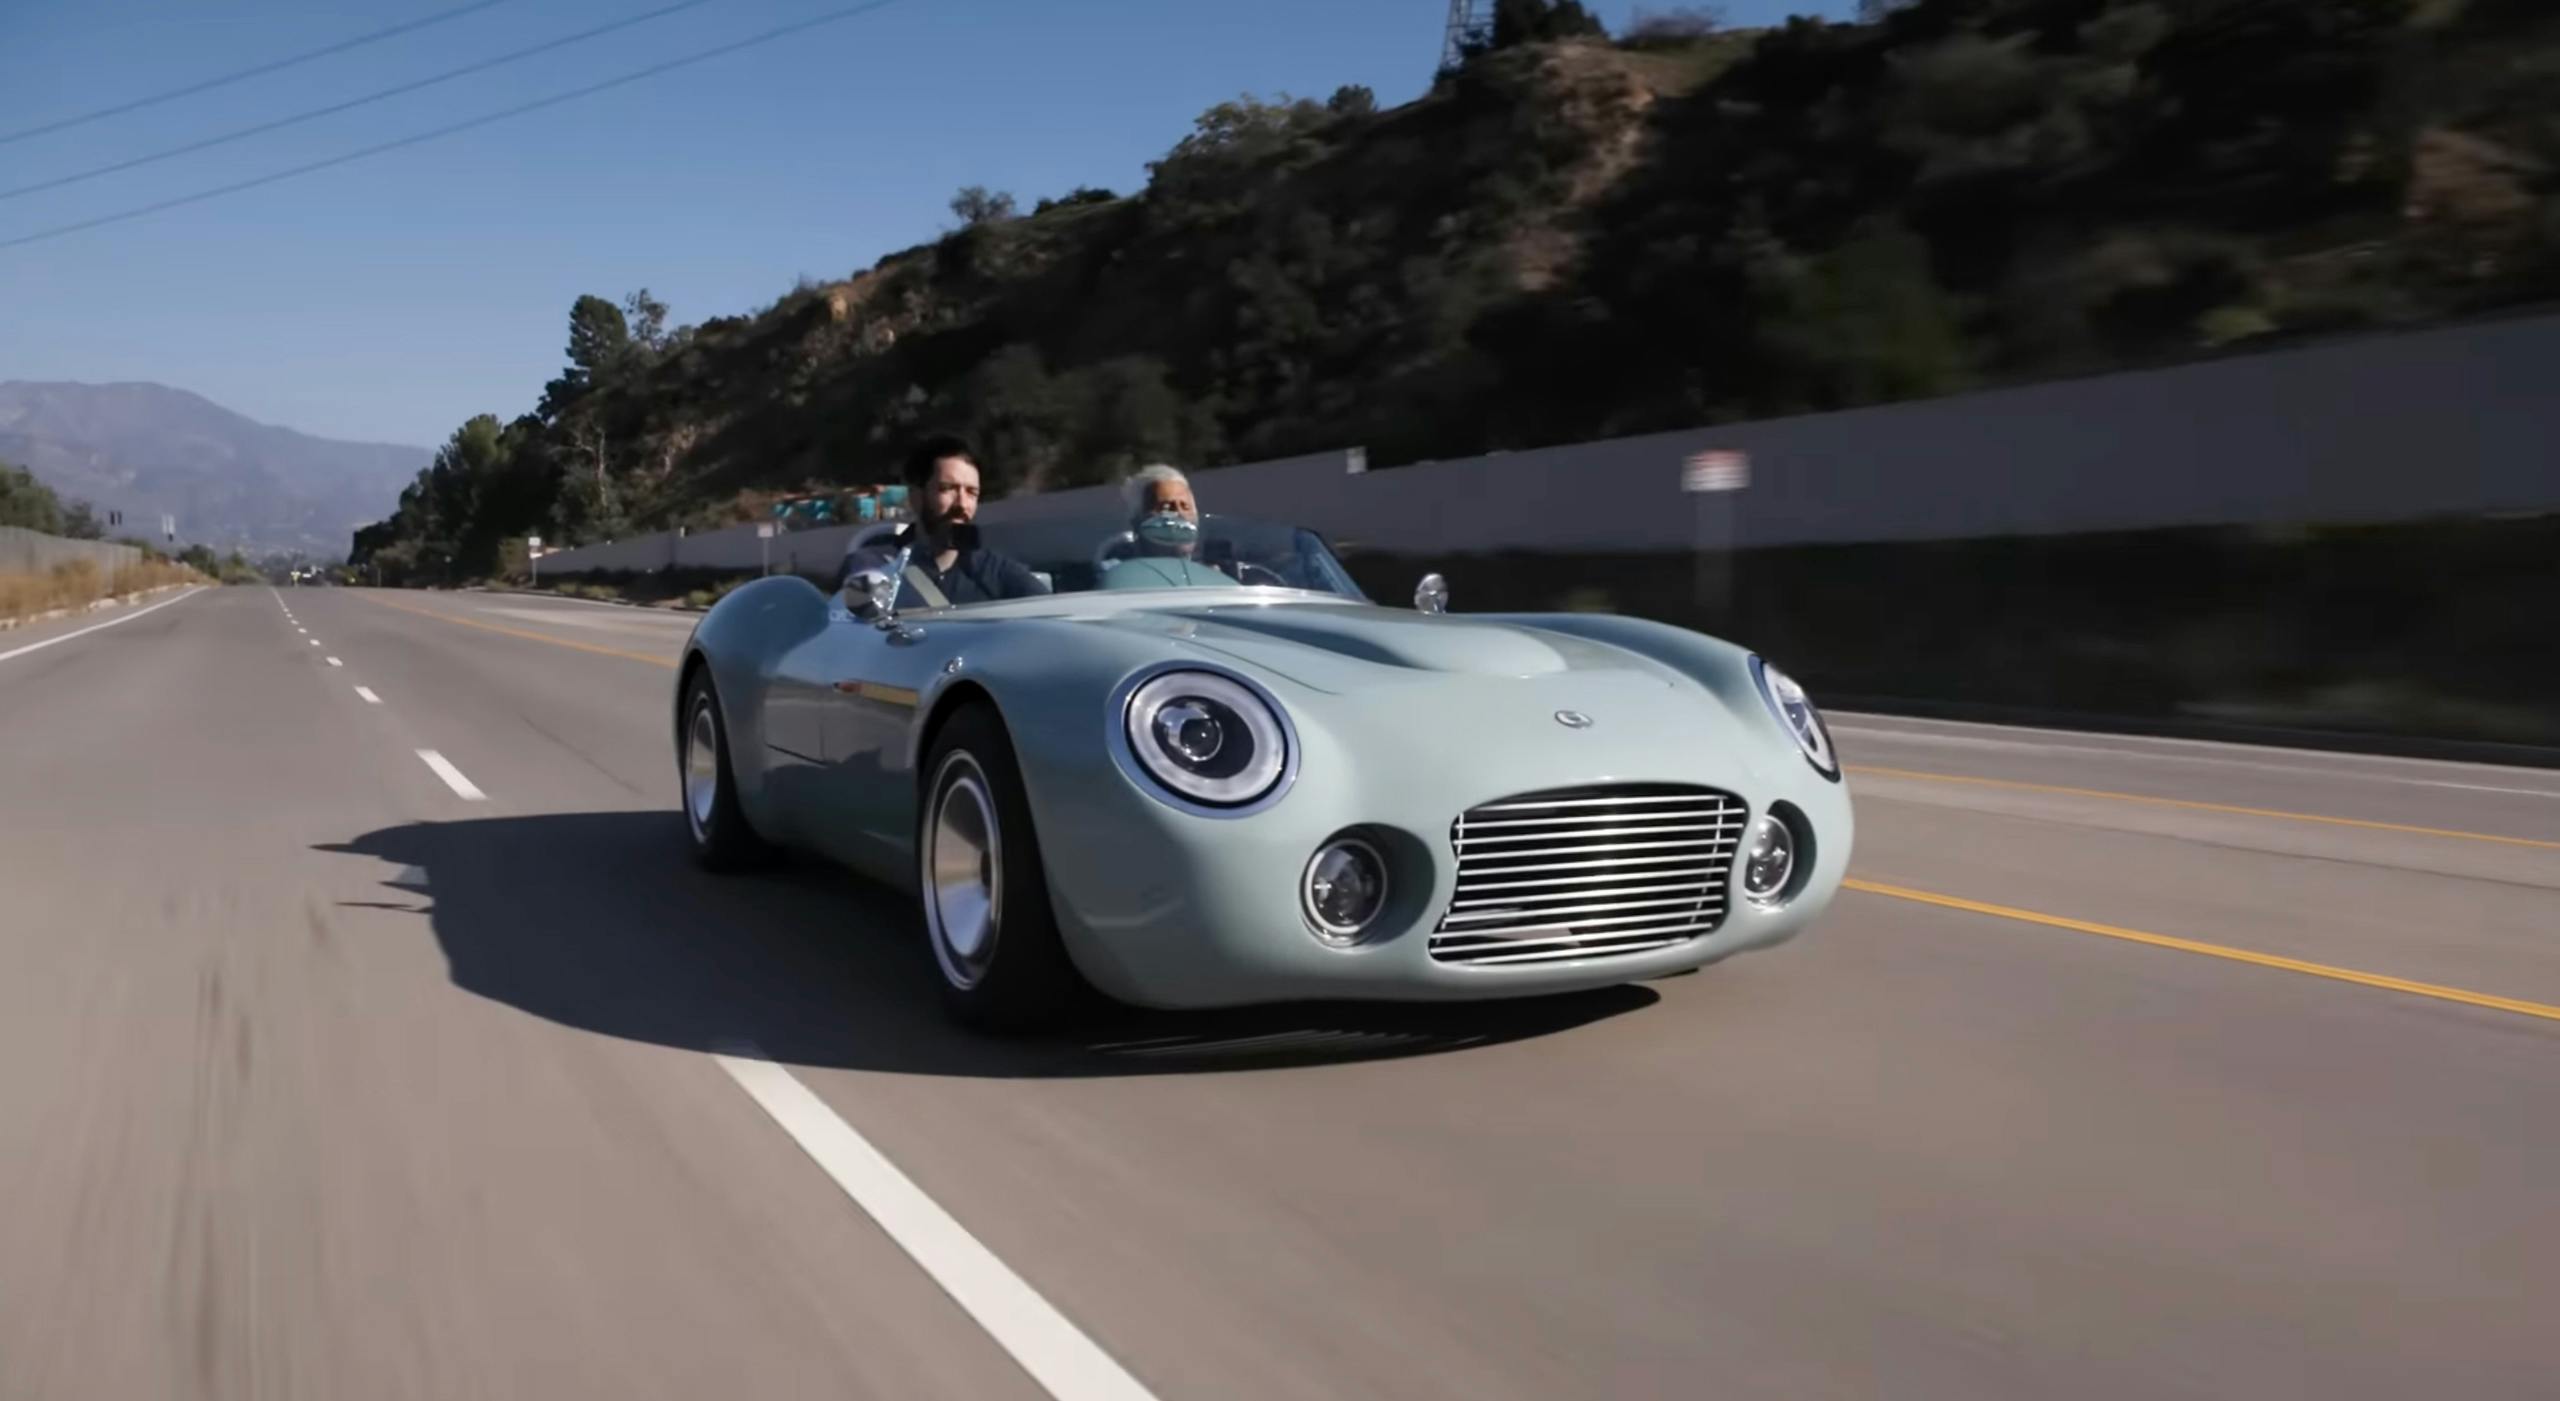  Customer reviews: Jay Leno's Garage Complete Vehicle